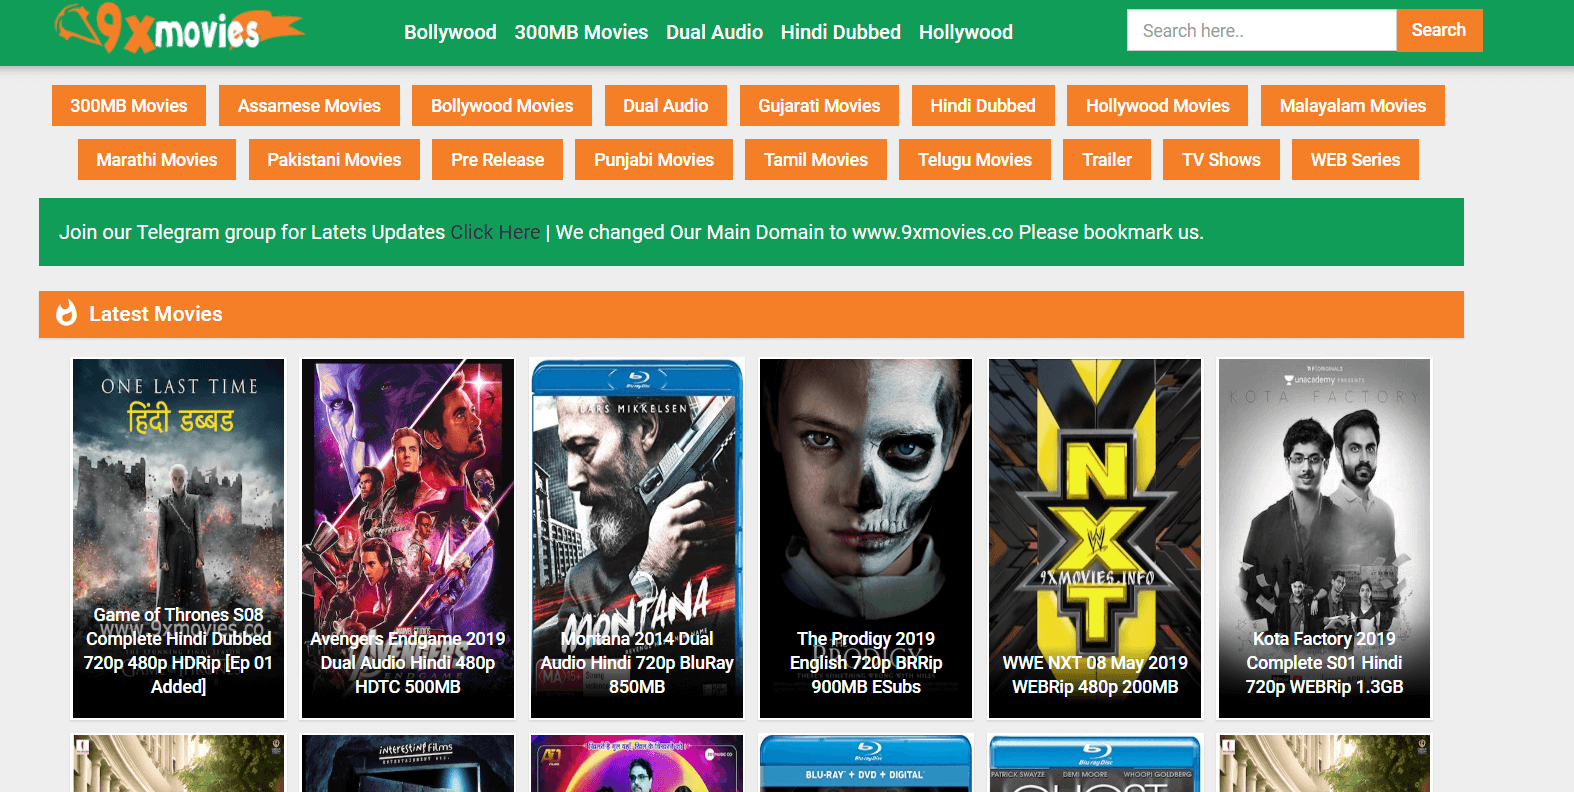 9xmovies 2020 Download New Movies Hd For Free Tamil Telugu Hindi Dubbed Movies News Bugz We changed our main domain please use our new domain www.9xmovies.support visit and bookmark us. tamil telugu hindi dubbed movies